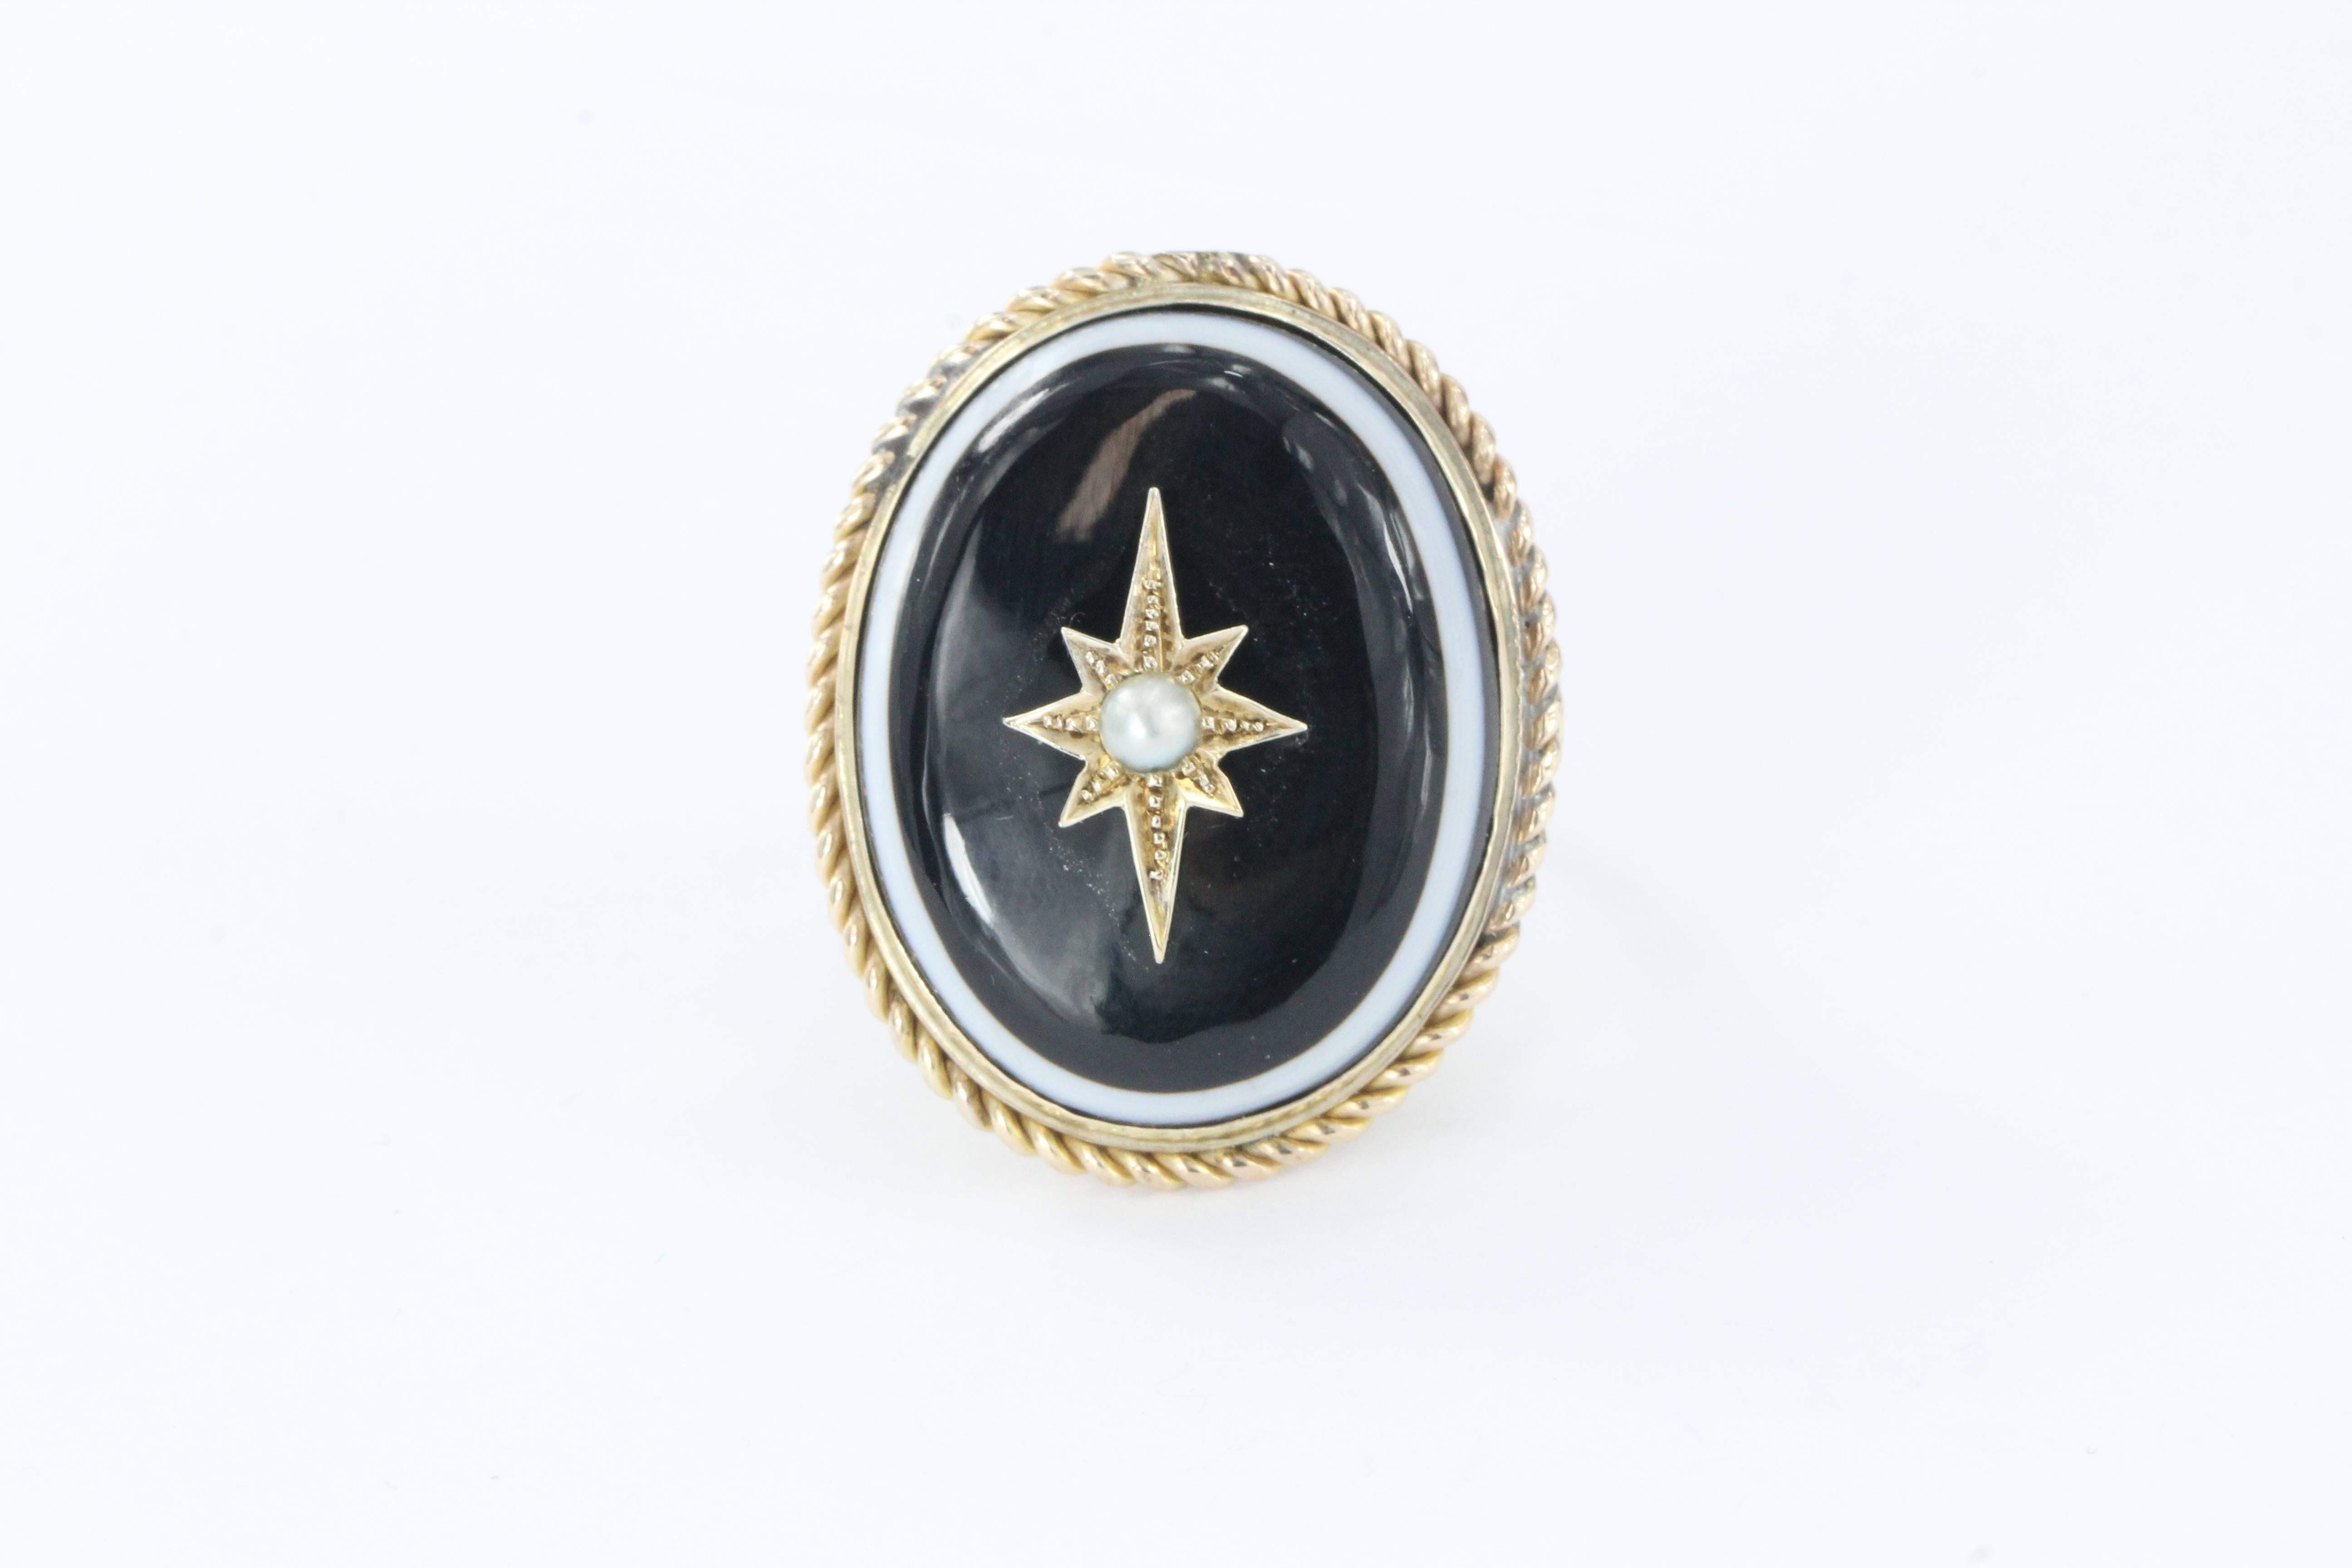  Antique Victorian & Gold Banded Agate Starburst Pearl Conversion Ring. The ring is in great antique estate condition and ready to wear. The stone is a little loose however. The ring is a conversion. It was originally a brooch or pendant that was